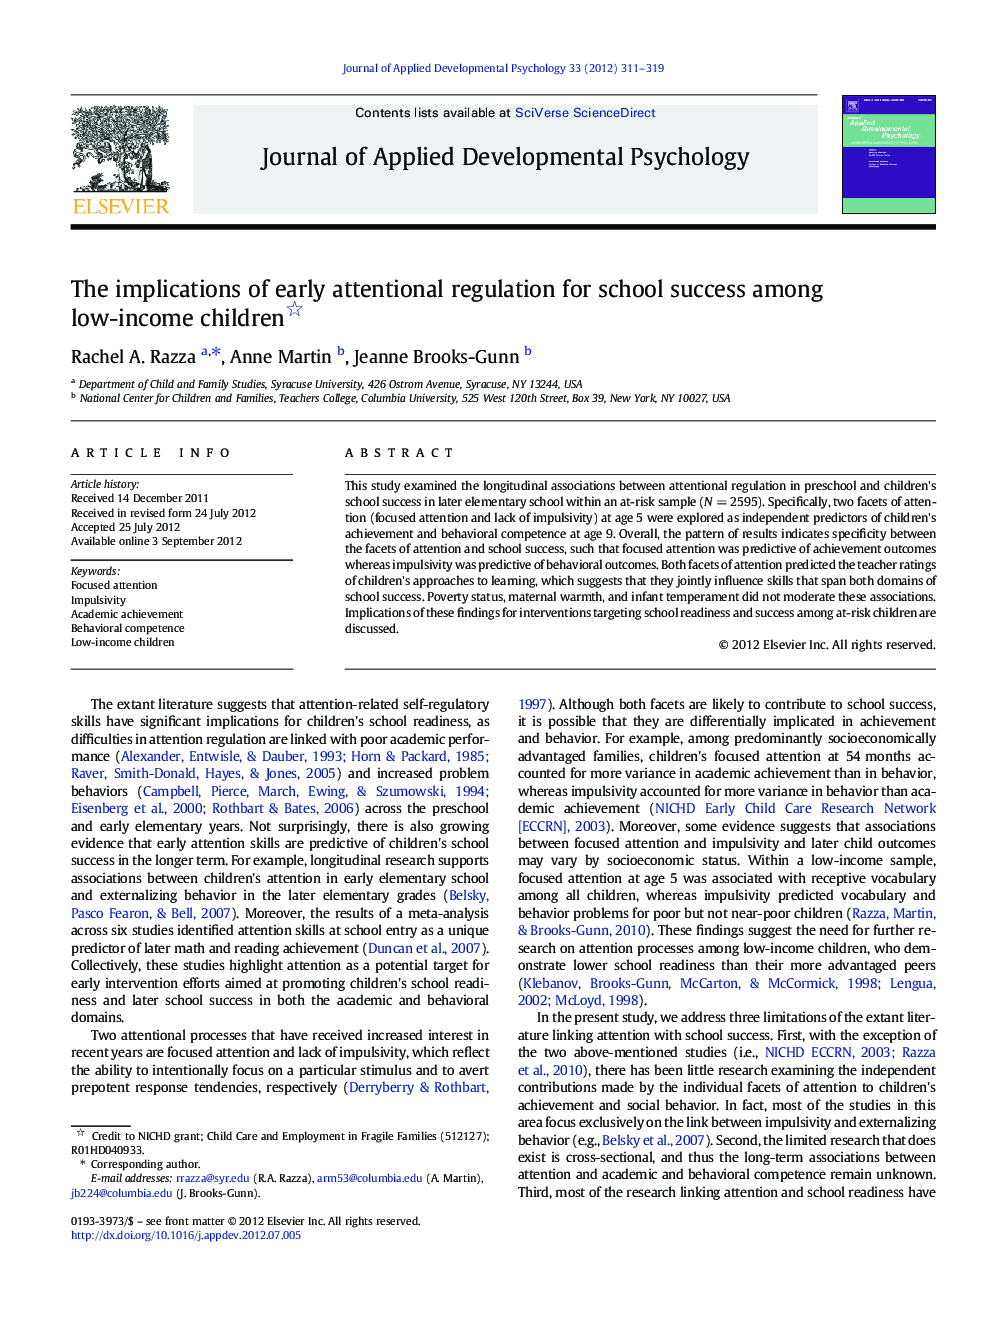 The implications of early attentional regulation for school success among low-income children 